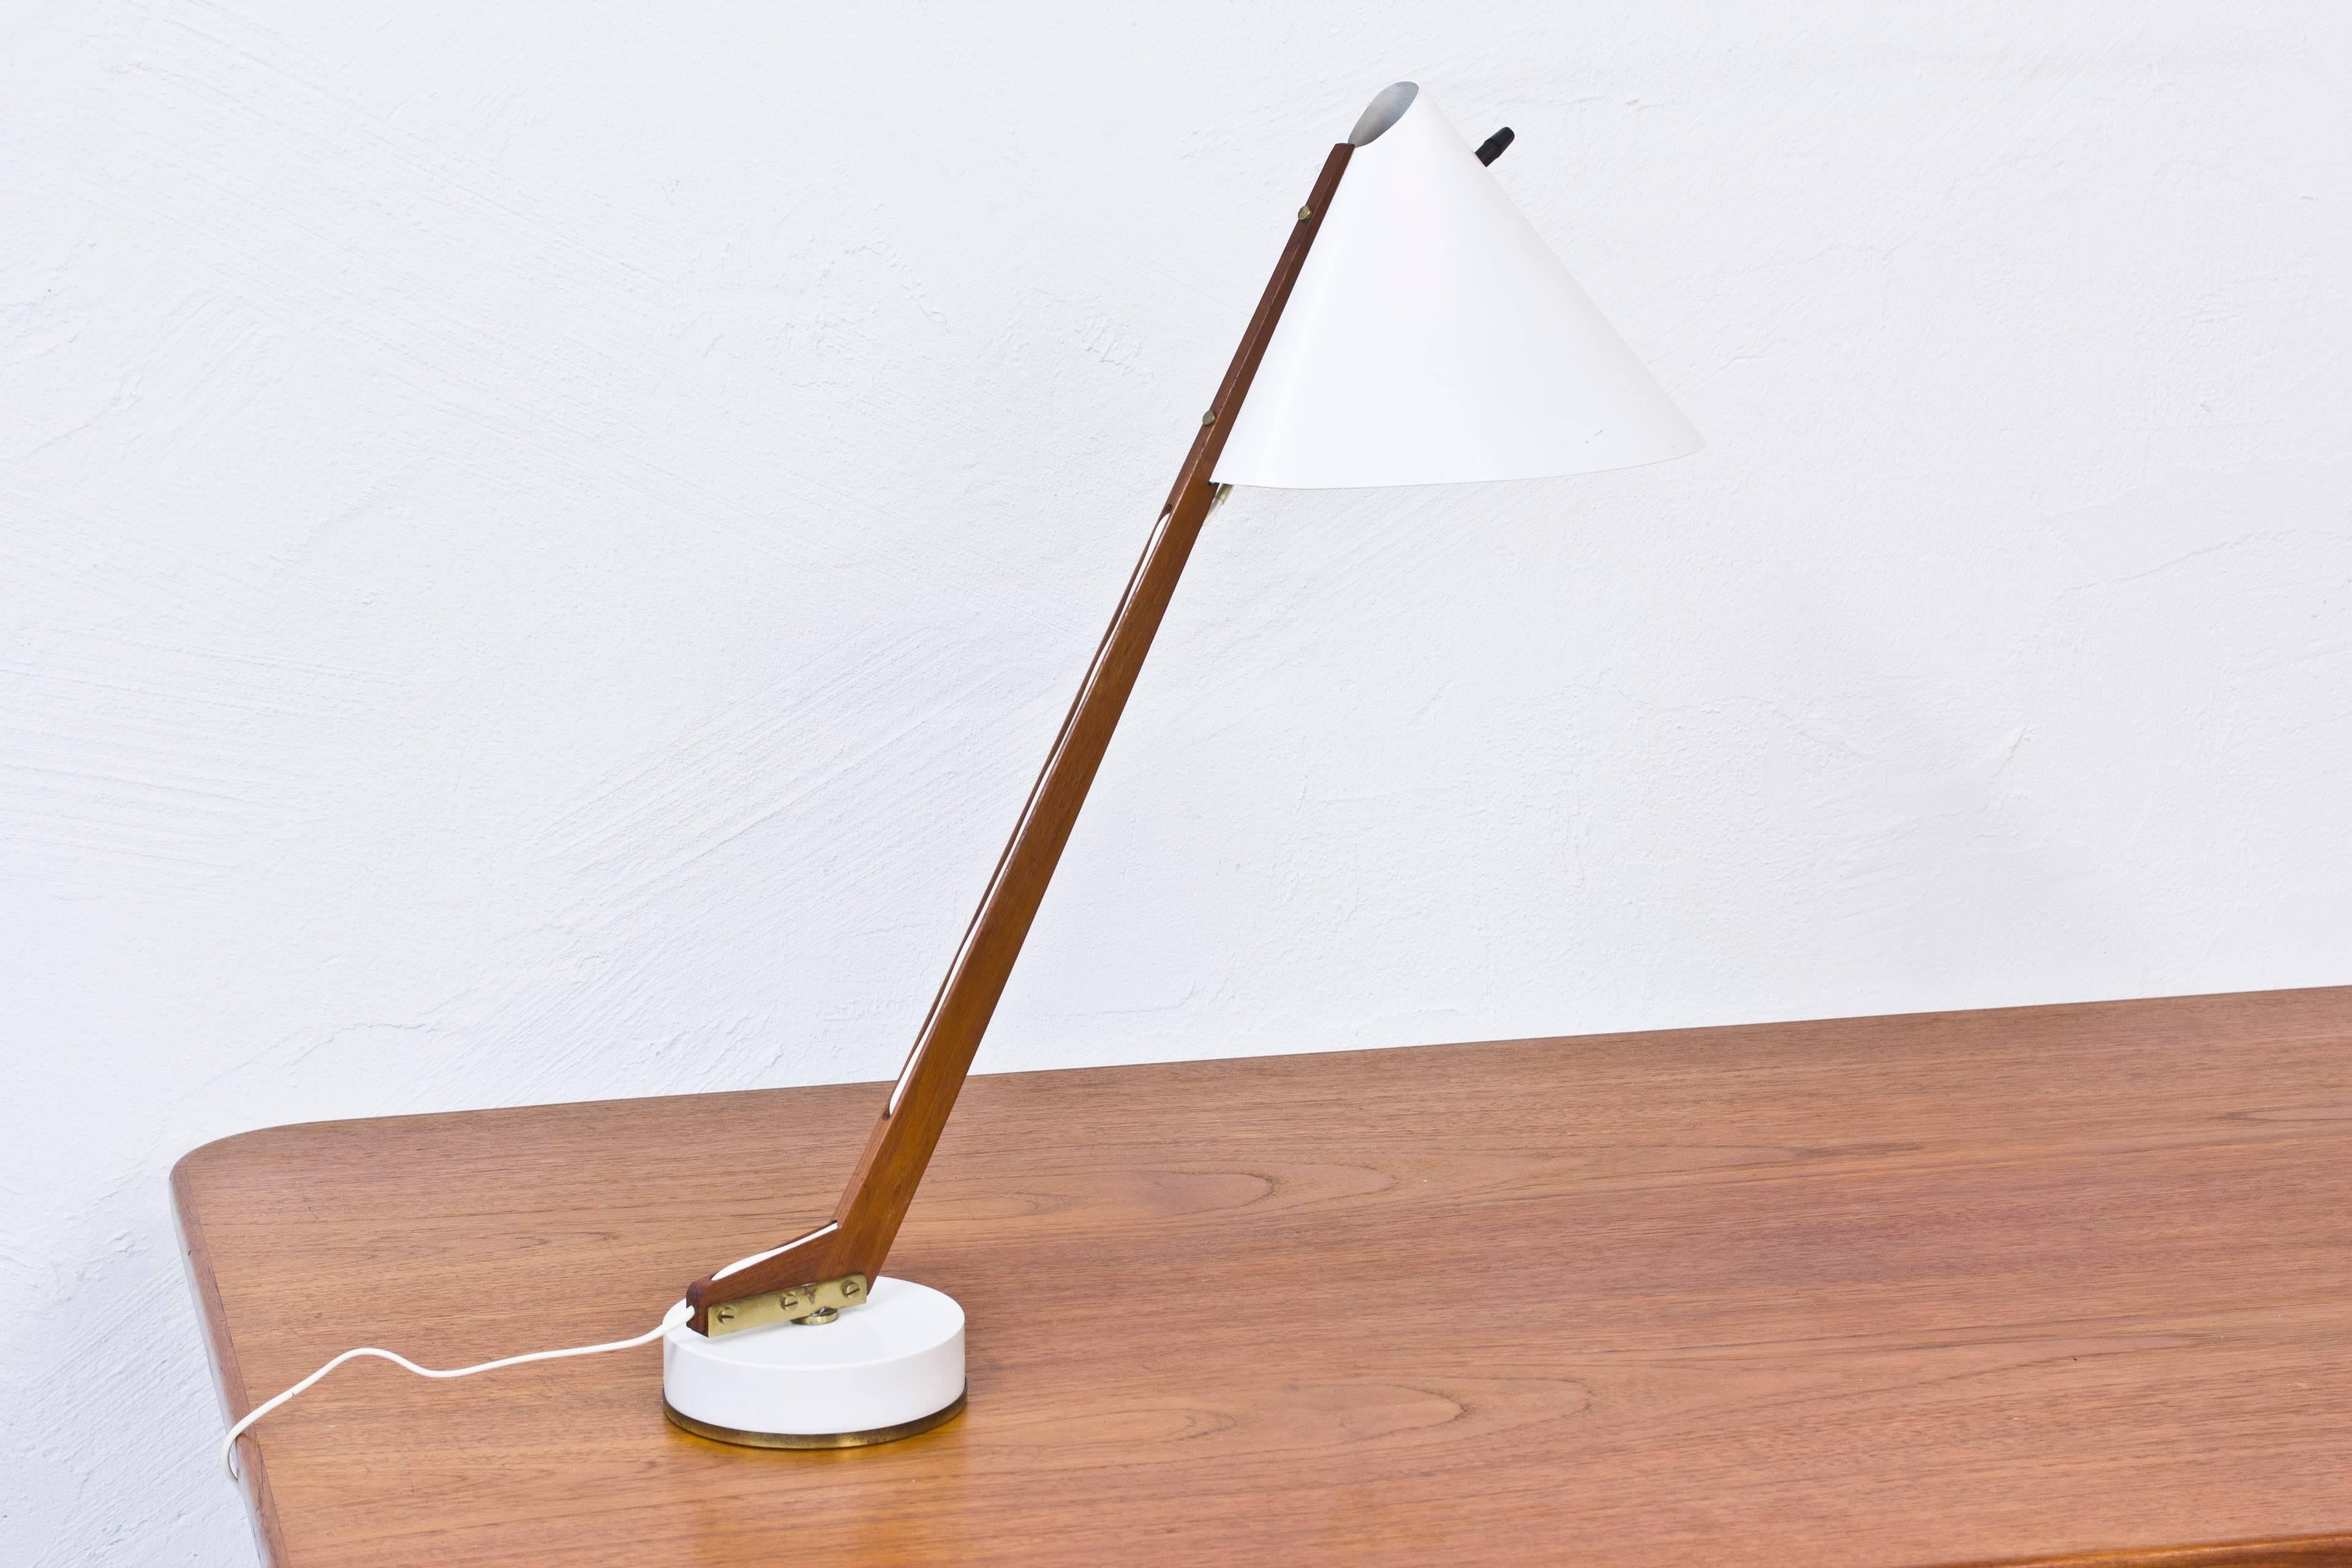 Table lamp model B 54 designed by Hans Agne Jakobsson. Produced by his own company in Markaryd, Sweden during the 1950s. Solid teak stem attached to a white lacquered and brass base. shade Lacquered in white with brass detail. Original turning light